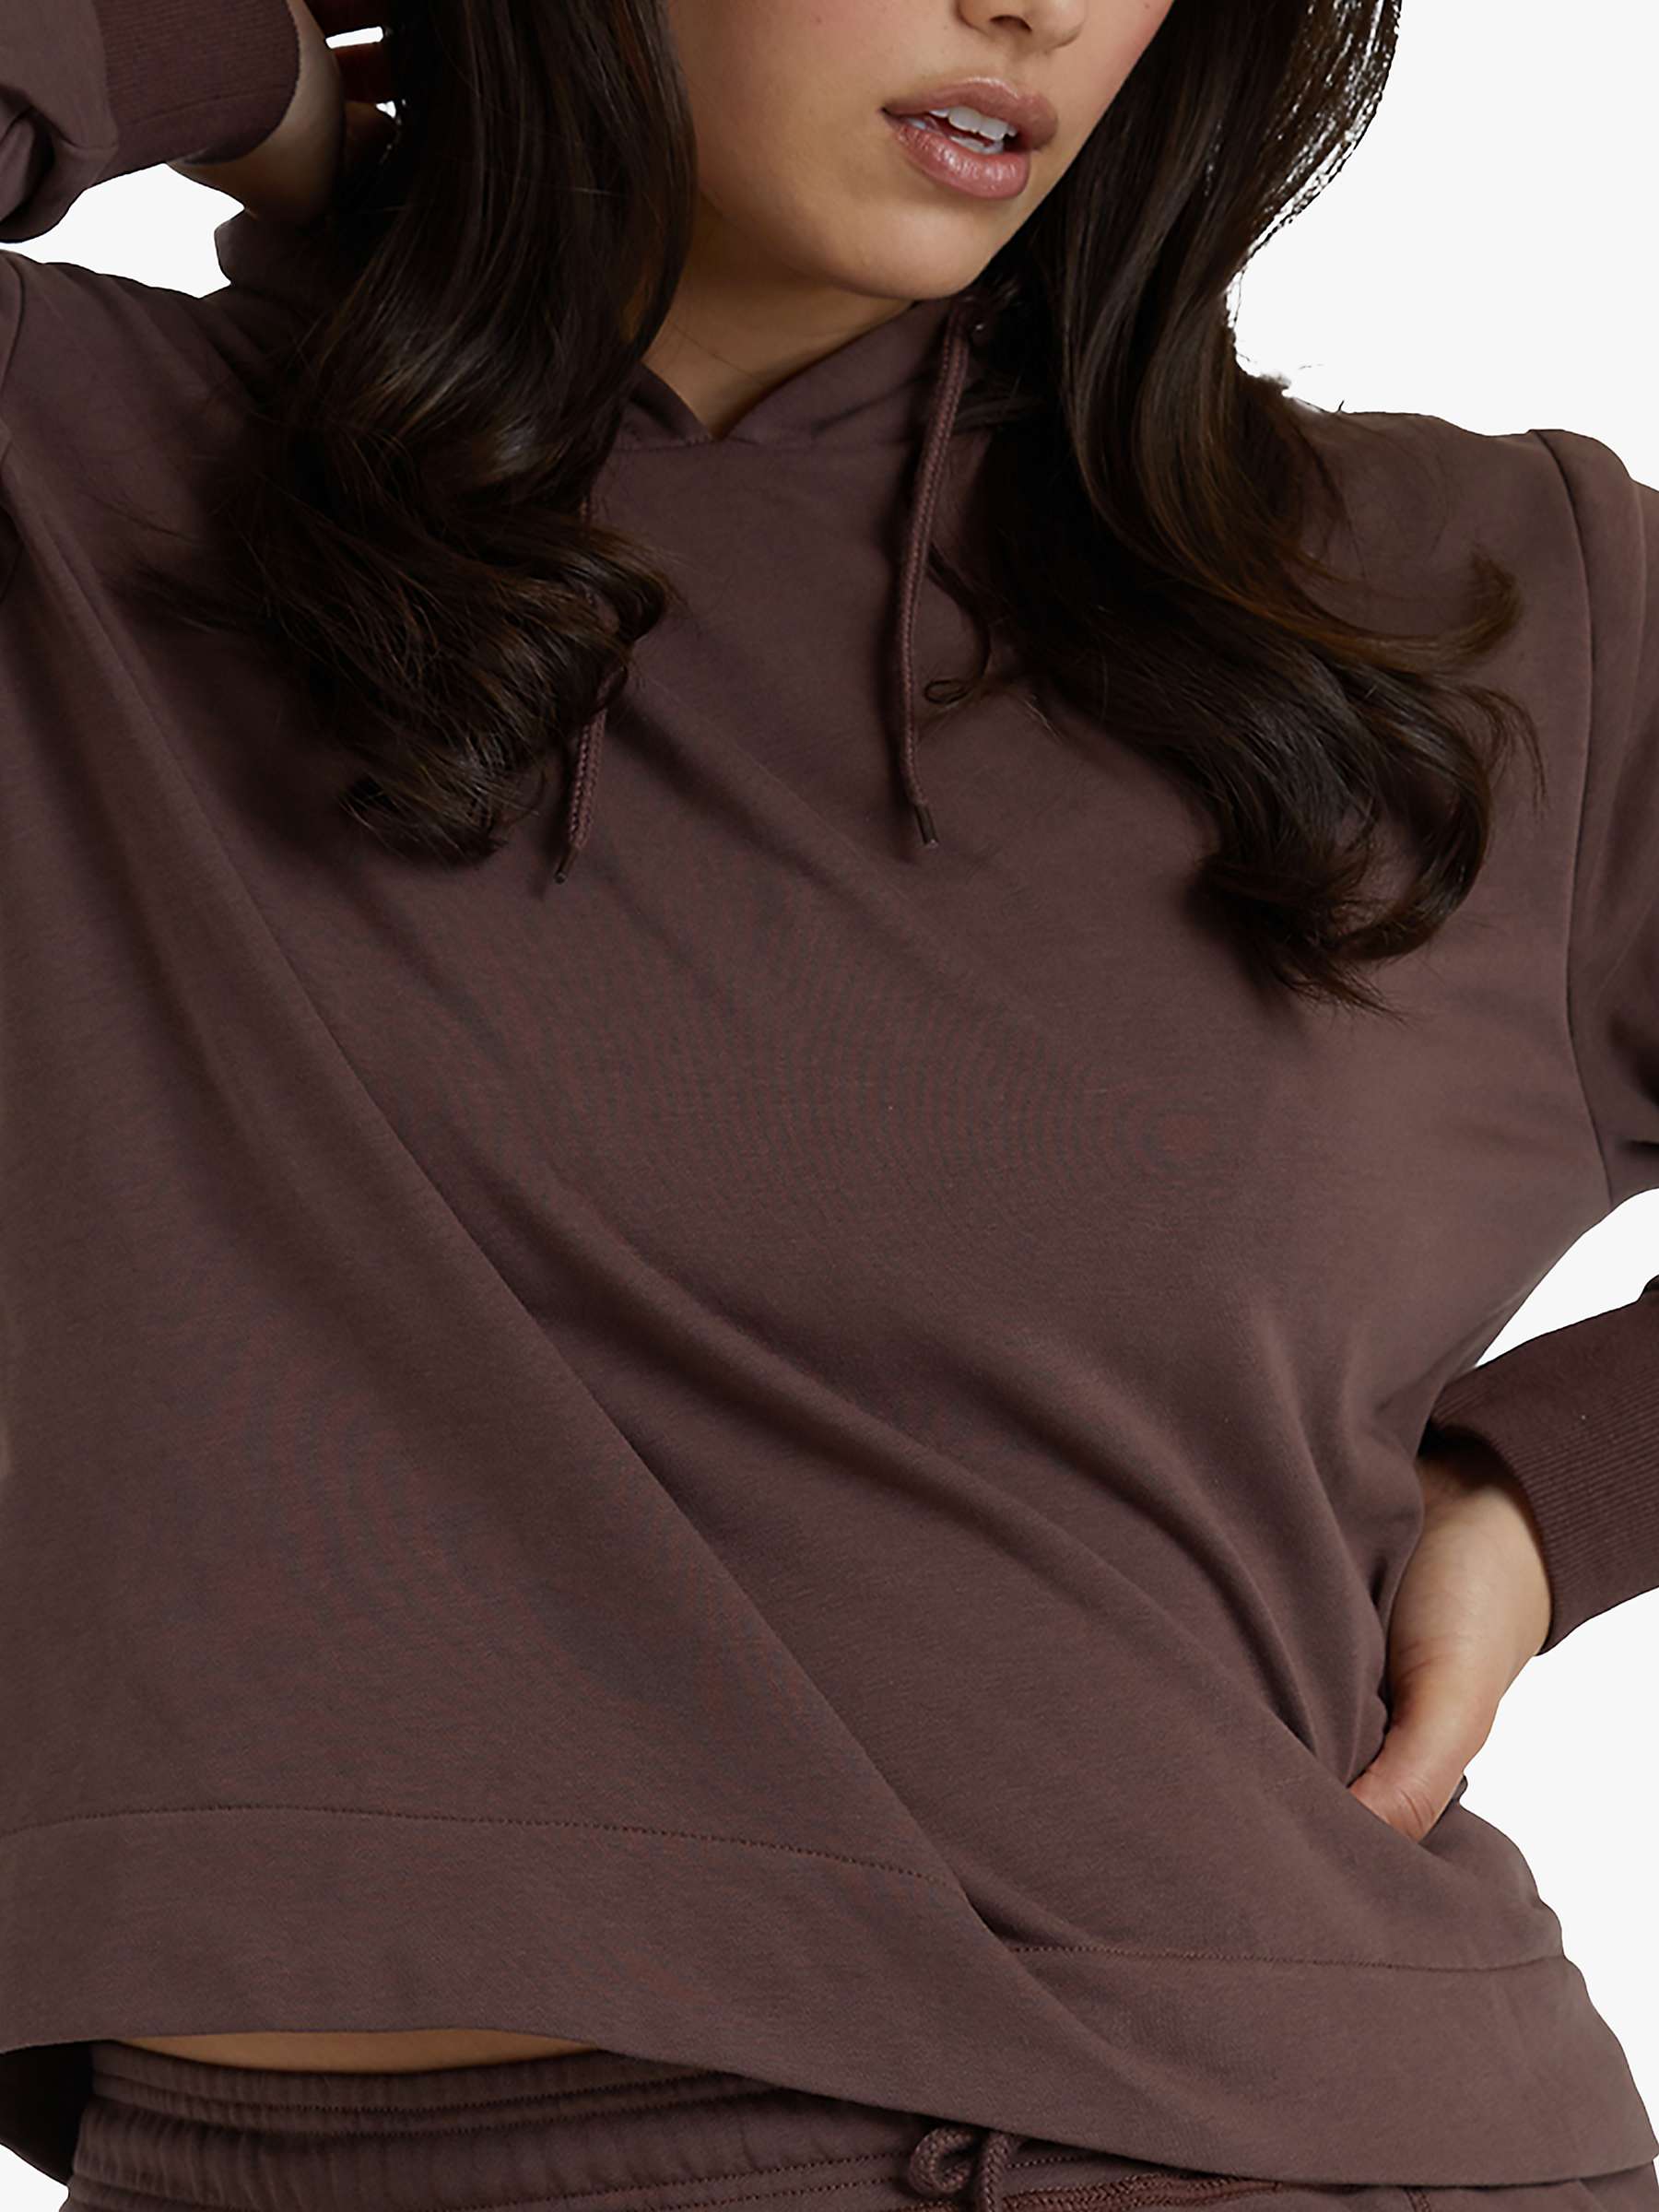 Buy Wolf & Whistle Curve Cropped Hooded Top, Brown Online at johnlewis.com